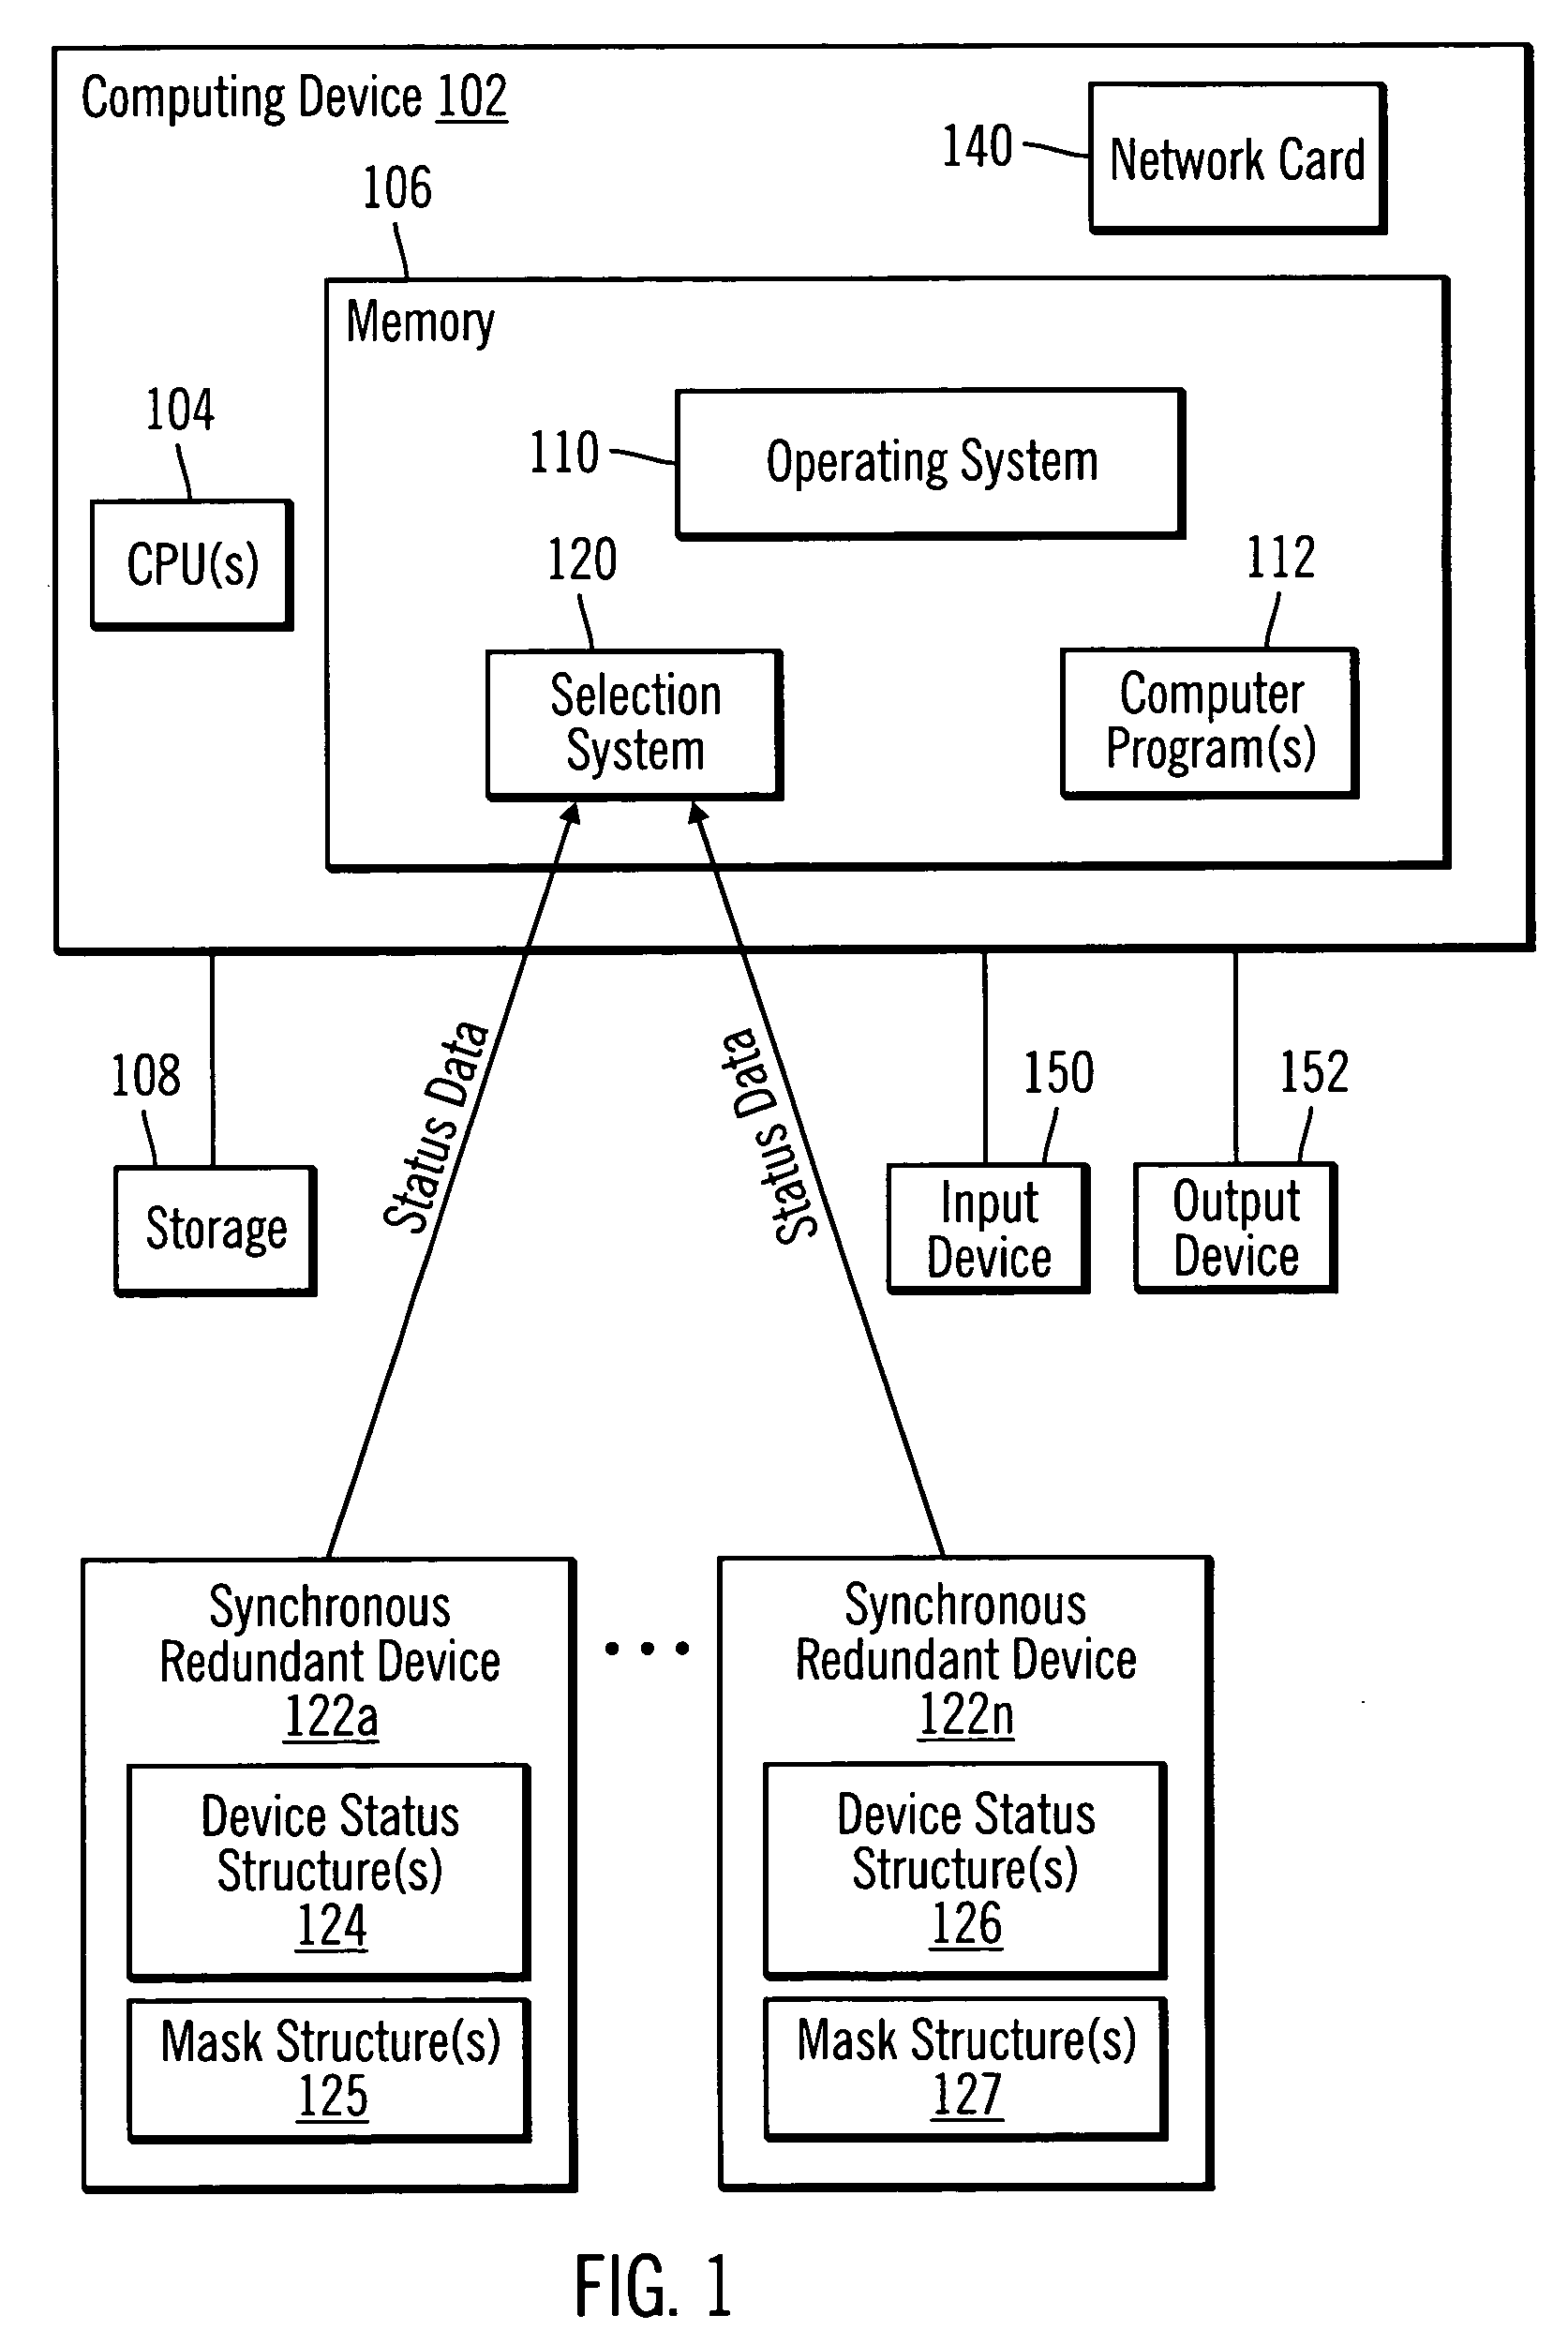 Selection of status data from synchronous redundant devices